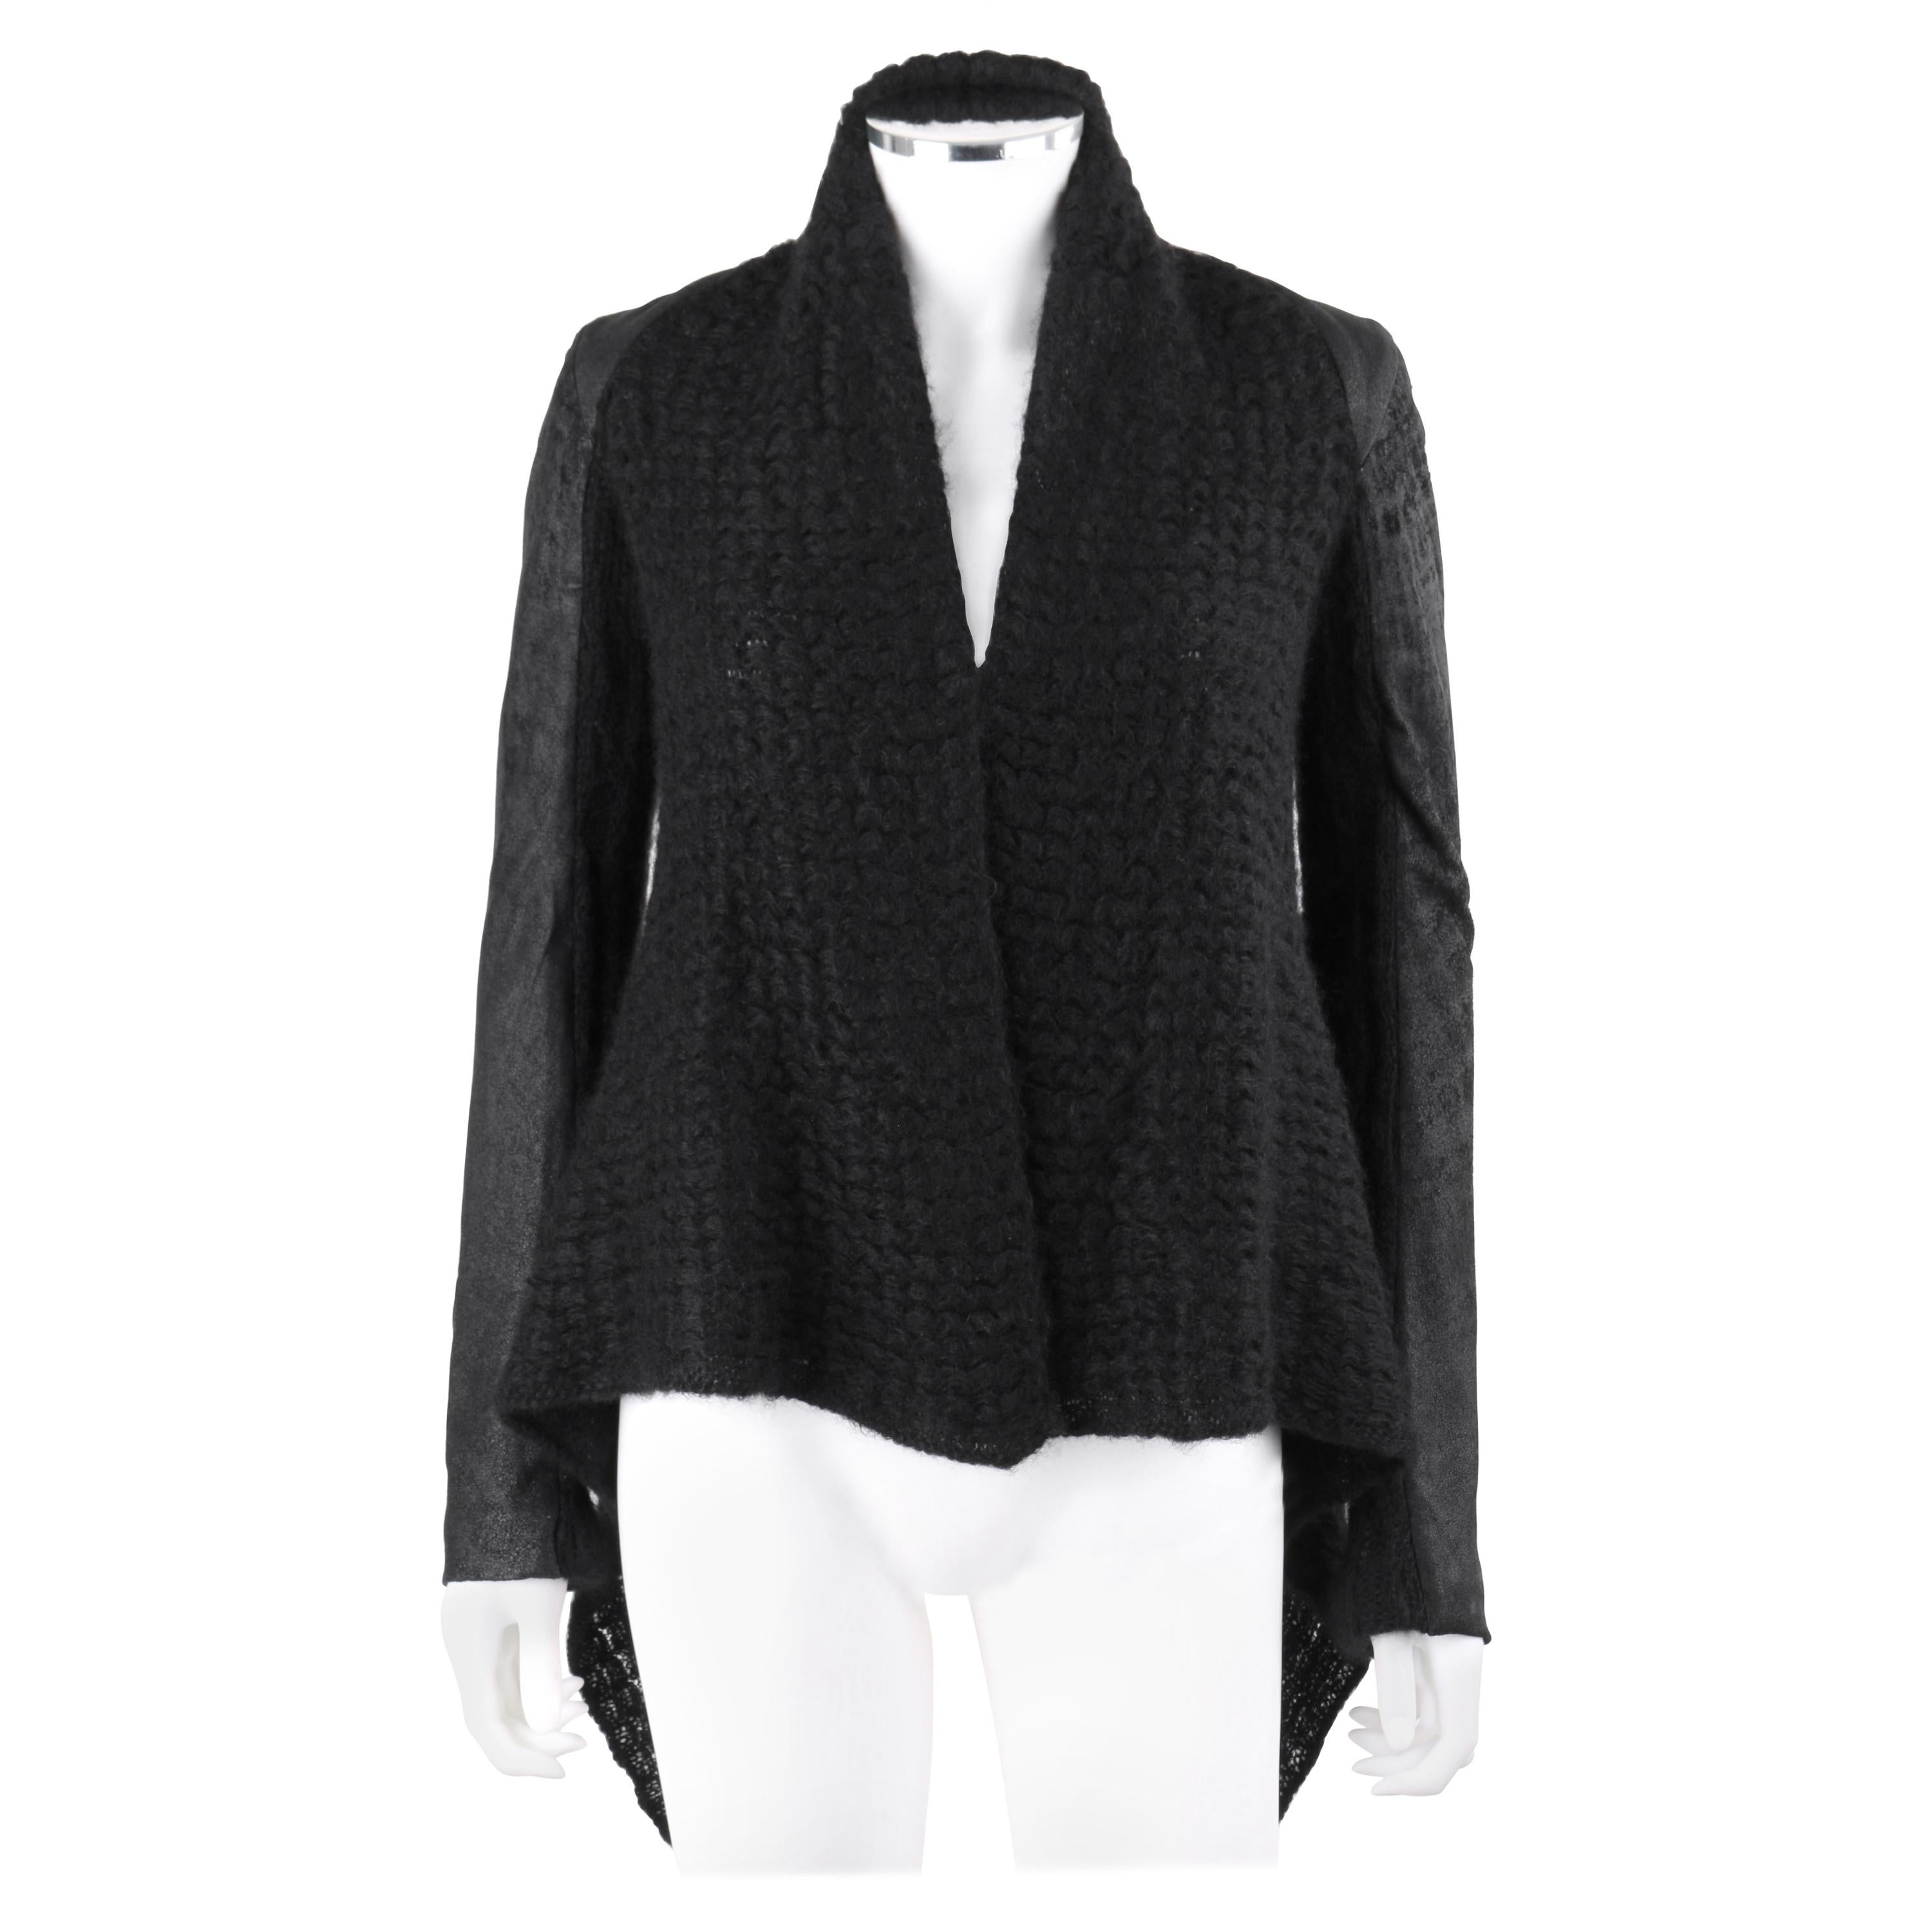 IKRAM RICK OWENS Black Open Waterfall Cardigan Leather Insets Mohair Sweater For Sale